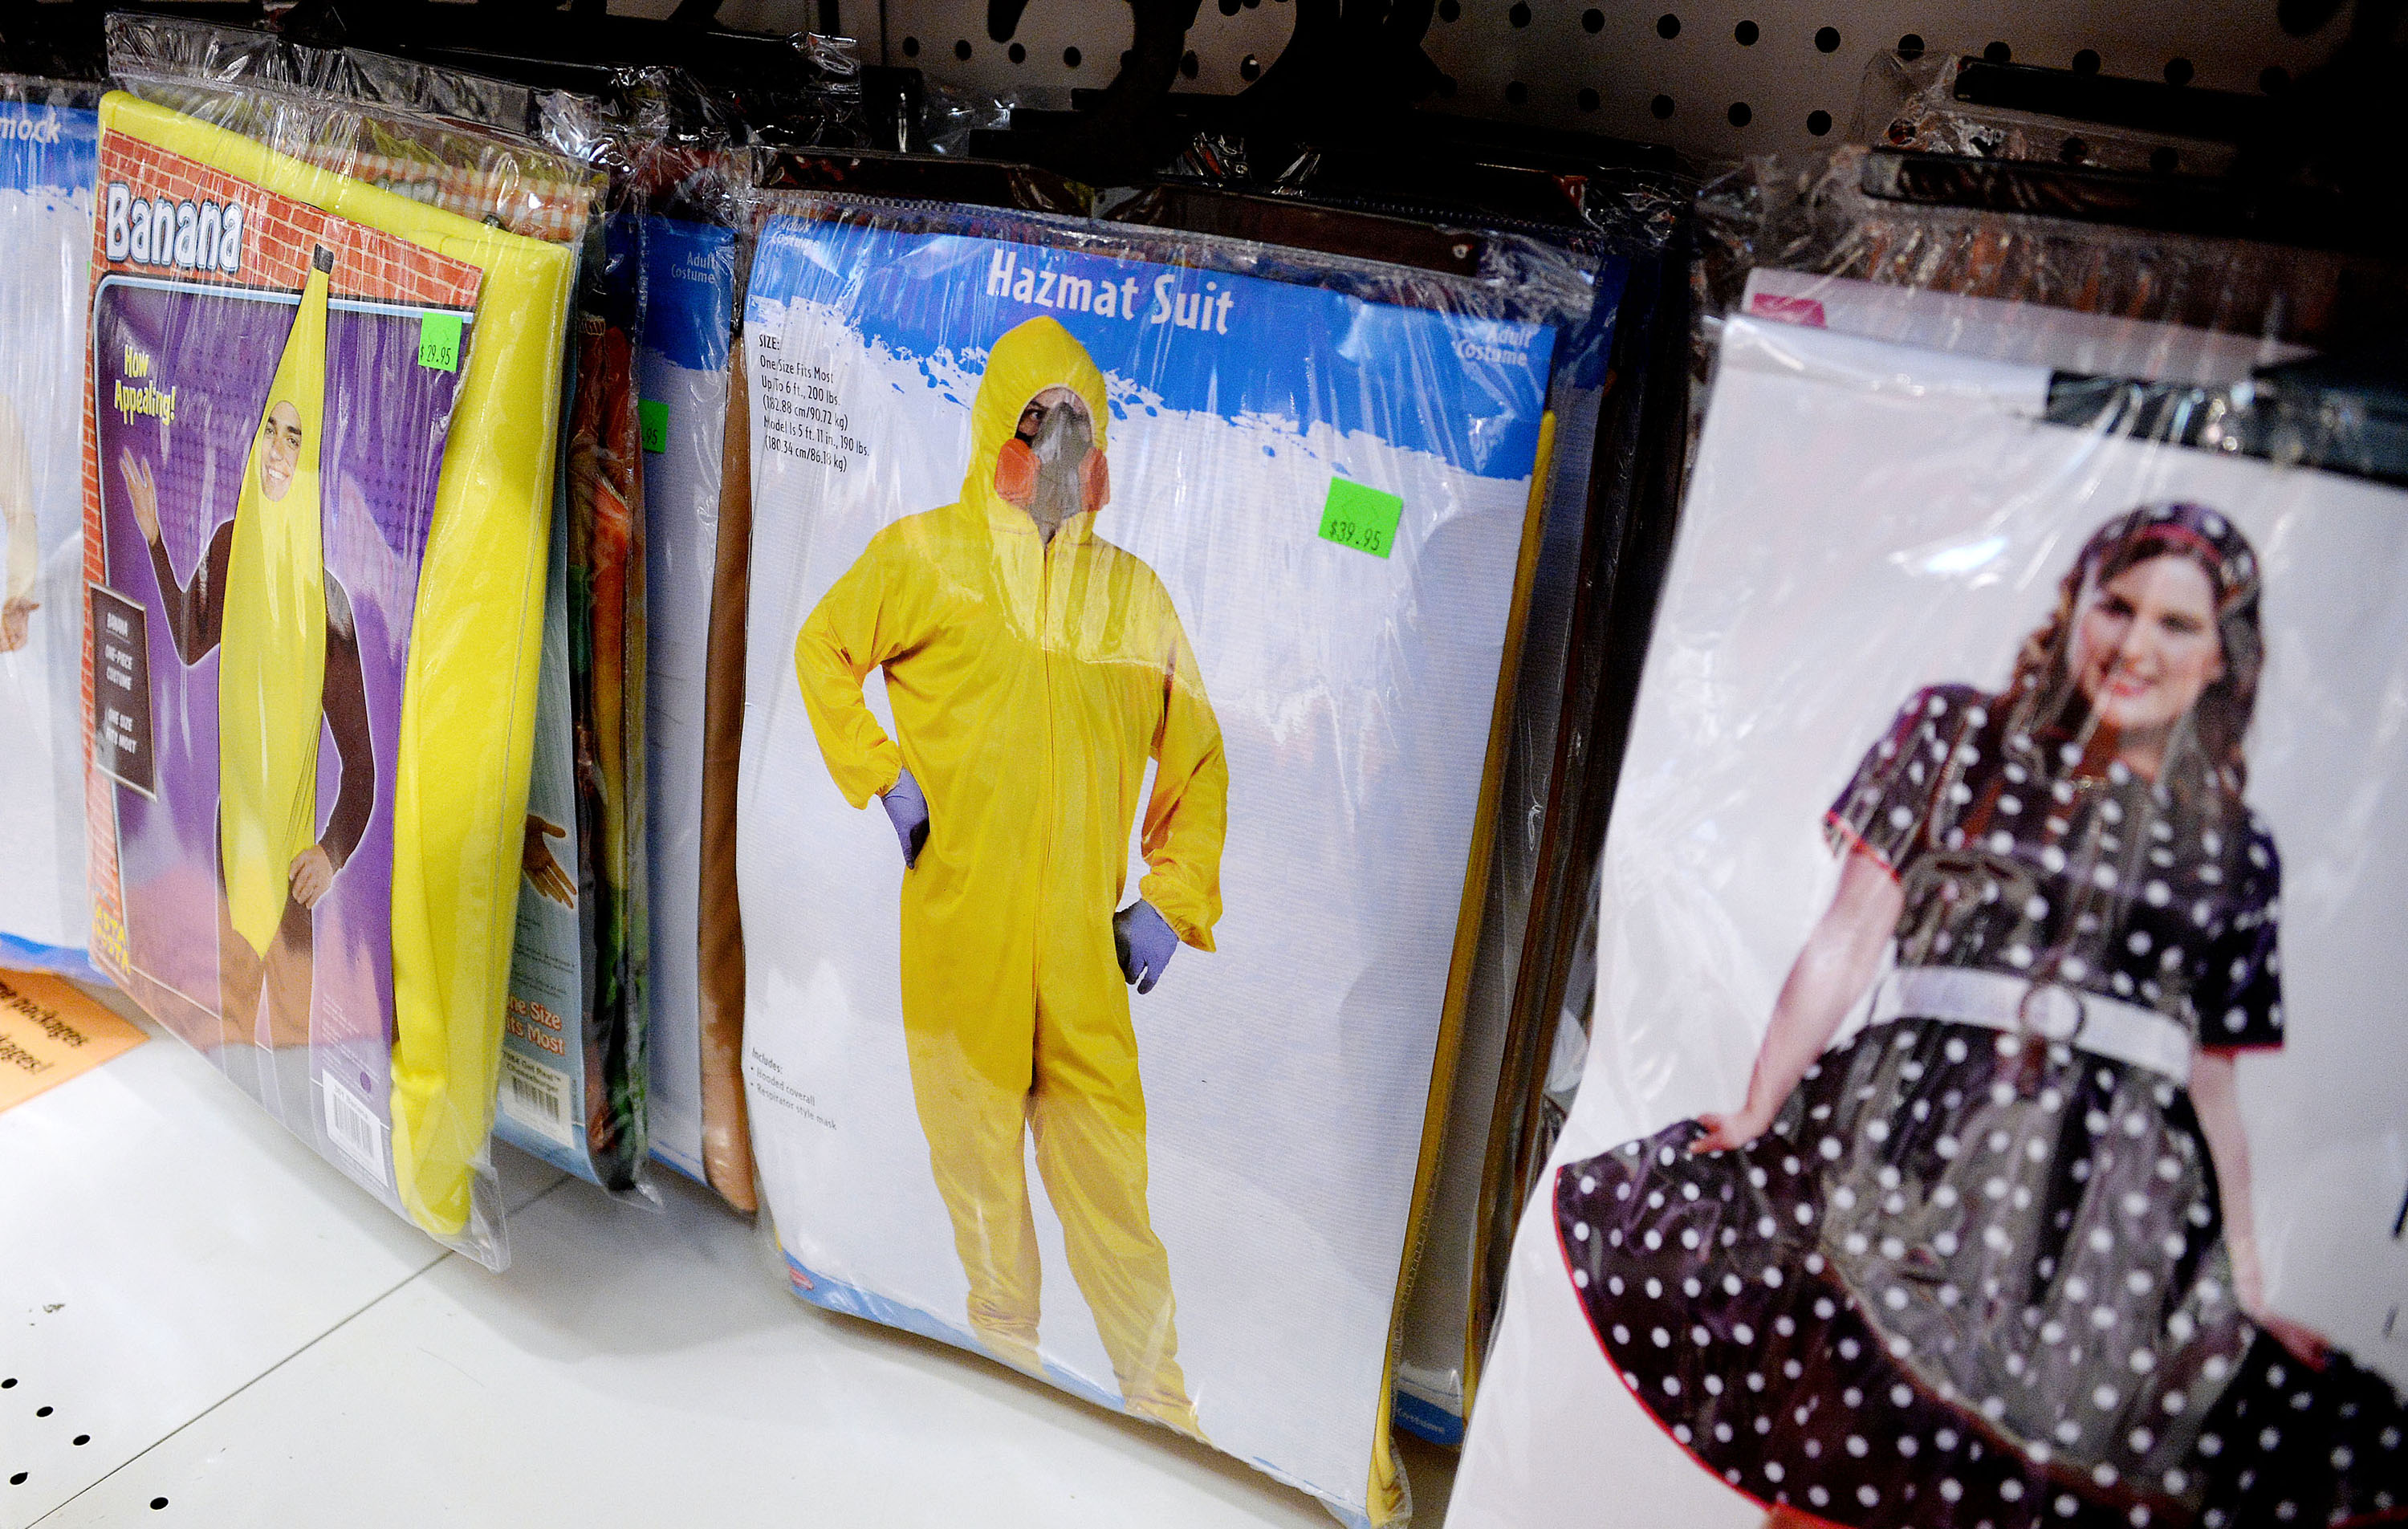 Costume stores are selling out of Hazmat suits as customers have Ebola on their minds this Halloween in Arlington, Va., on Friday, Oct. 17, 2014. (Olivier Douliery/Abaca Press/MCT)